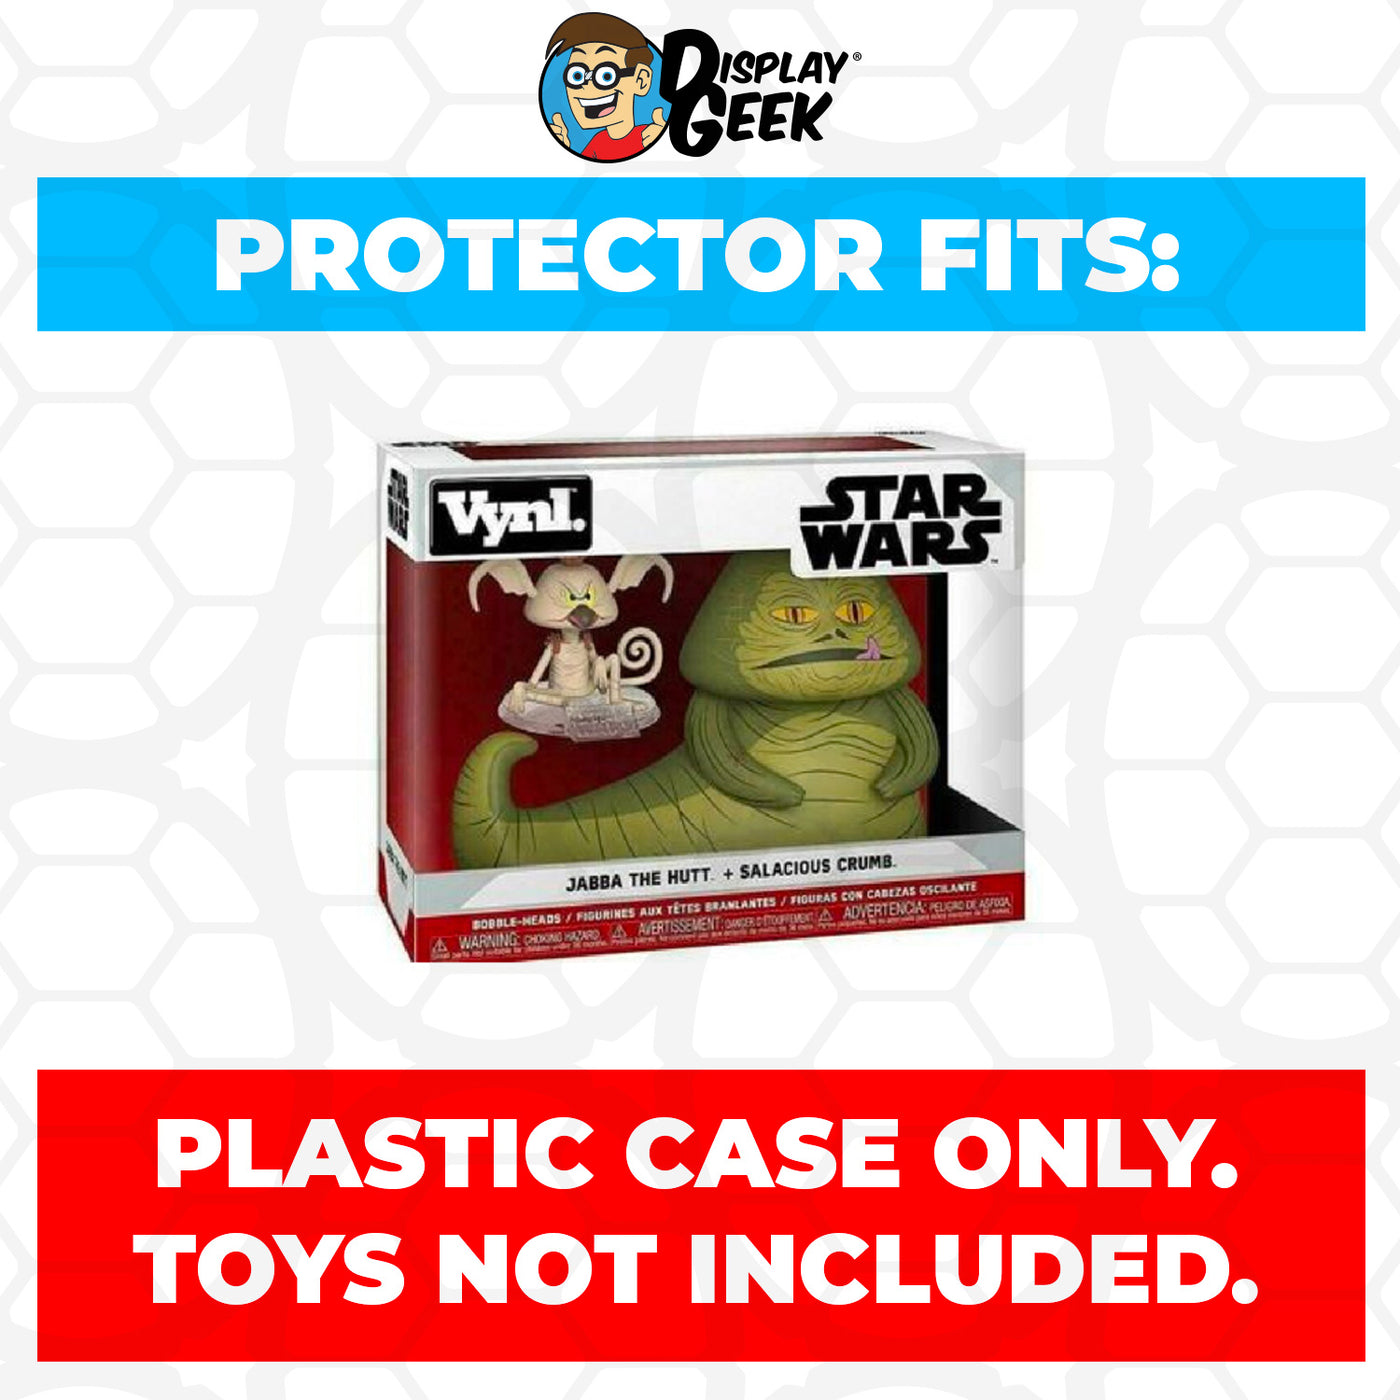 Pop Protector for Vynl 2 Pack Jabba the Hutt & Salacious Crumb Funko on The Protector Guide App by Display Geek